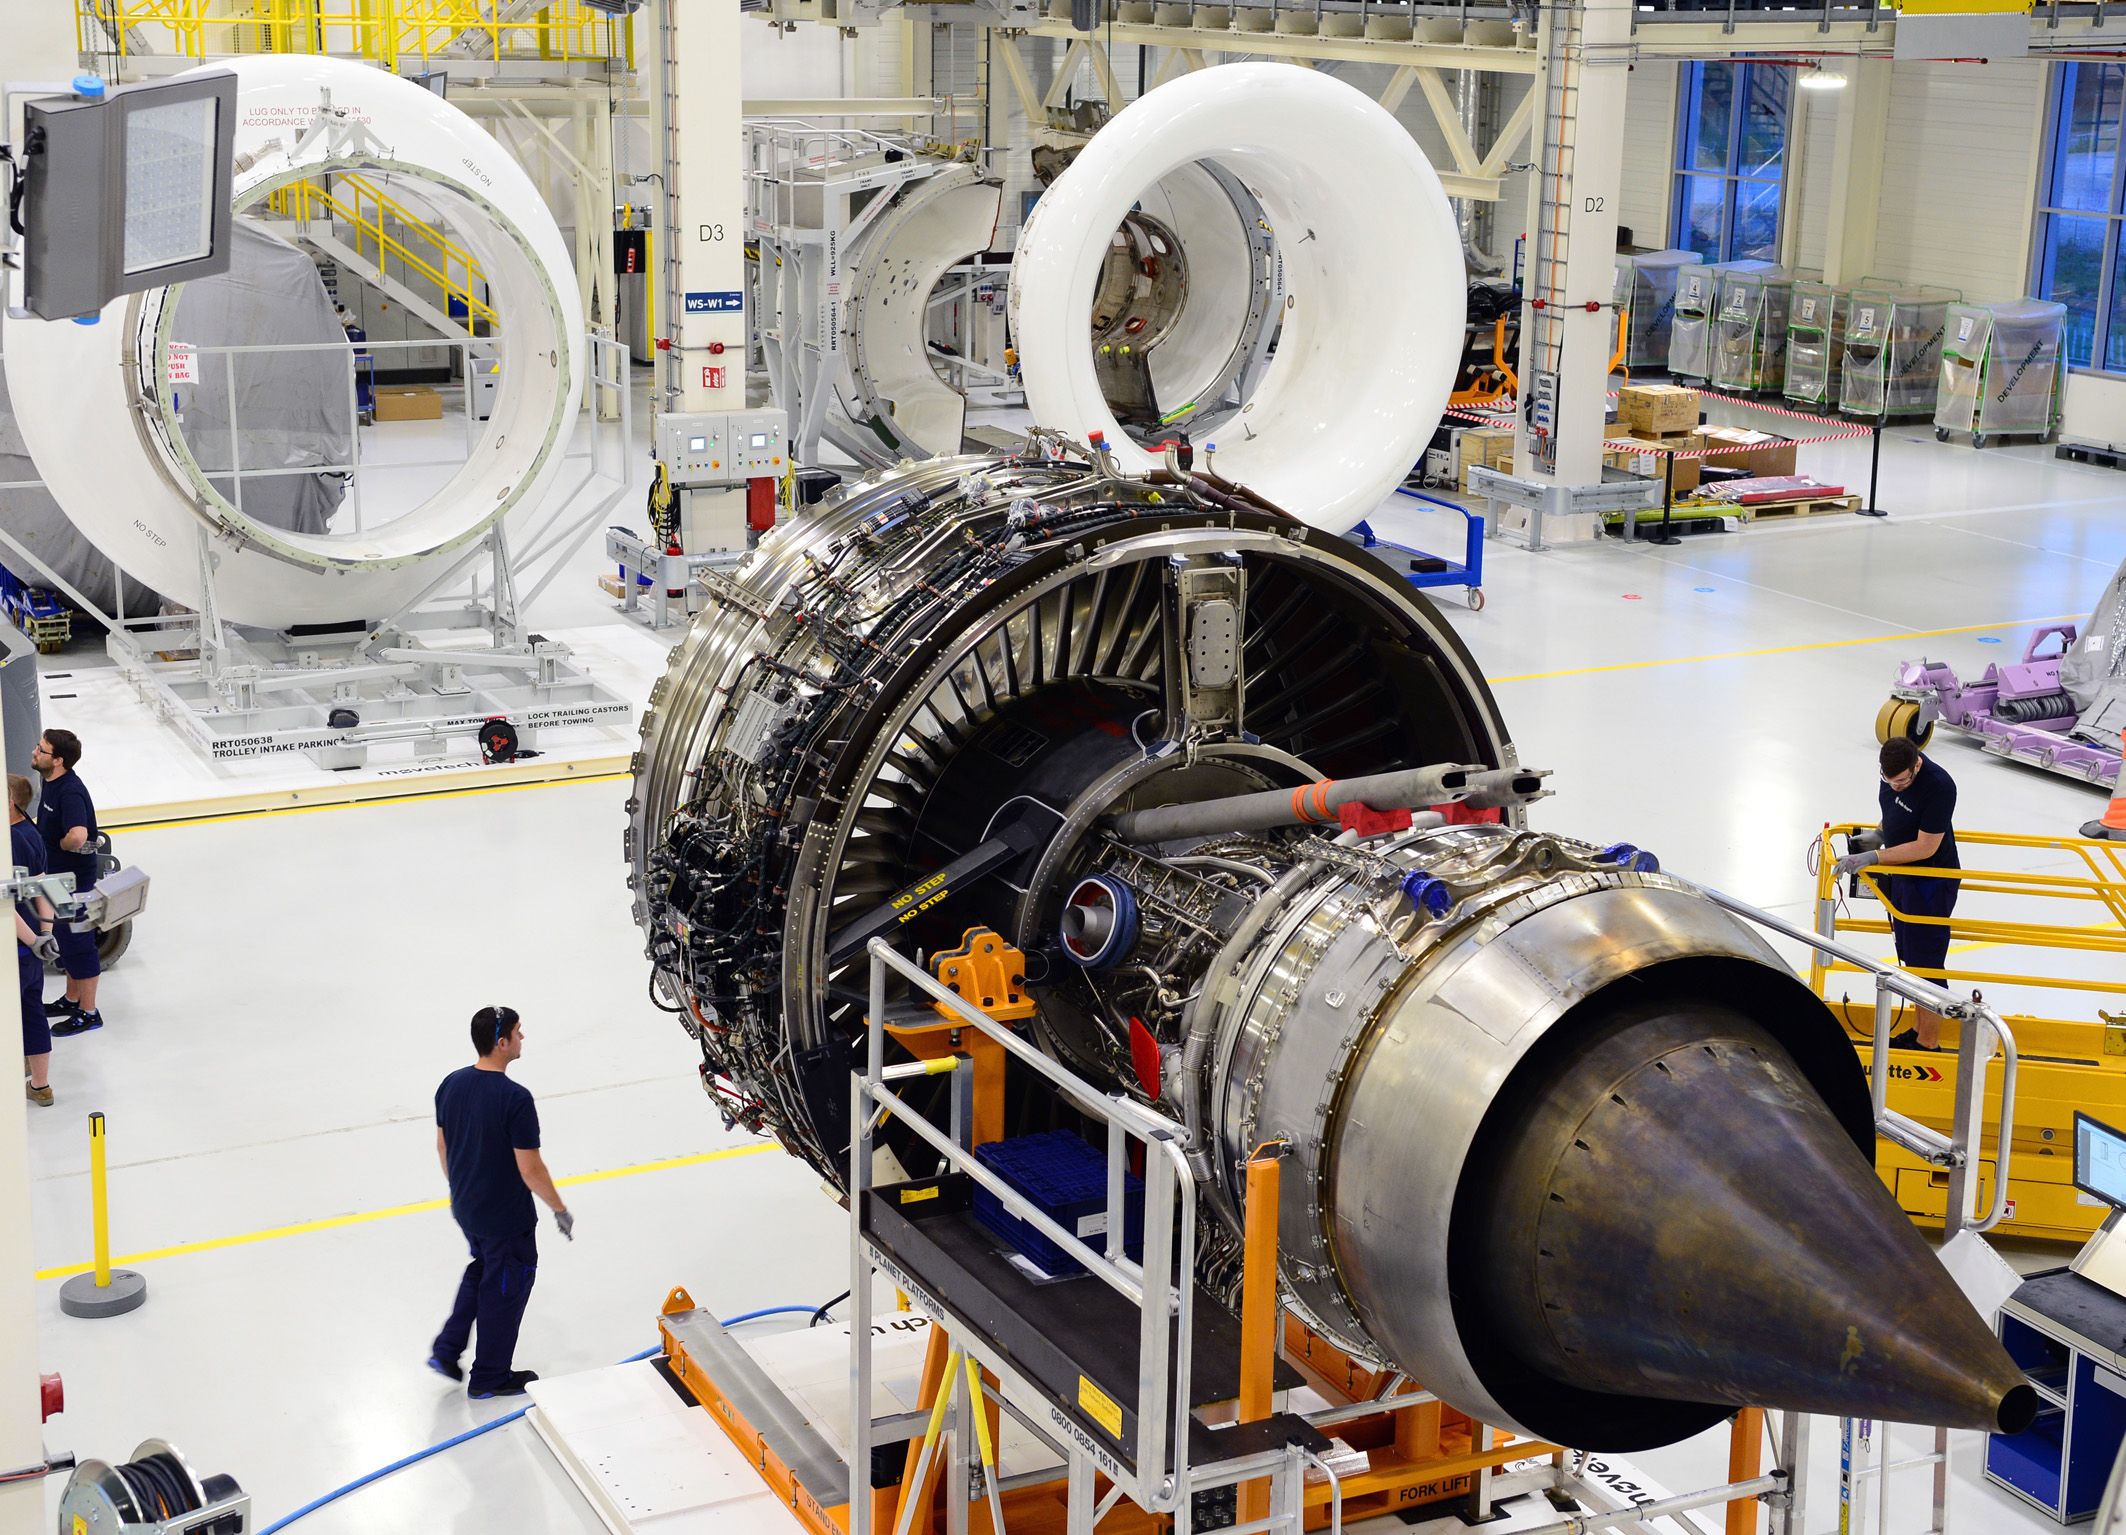 Engineers and jet engines inside Rolls Royce's Trent Engine Production facility.